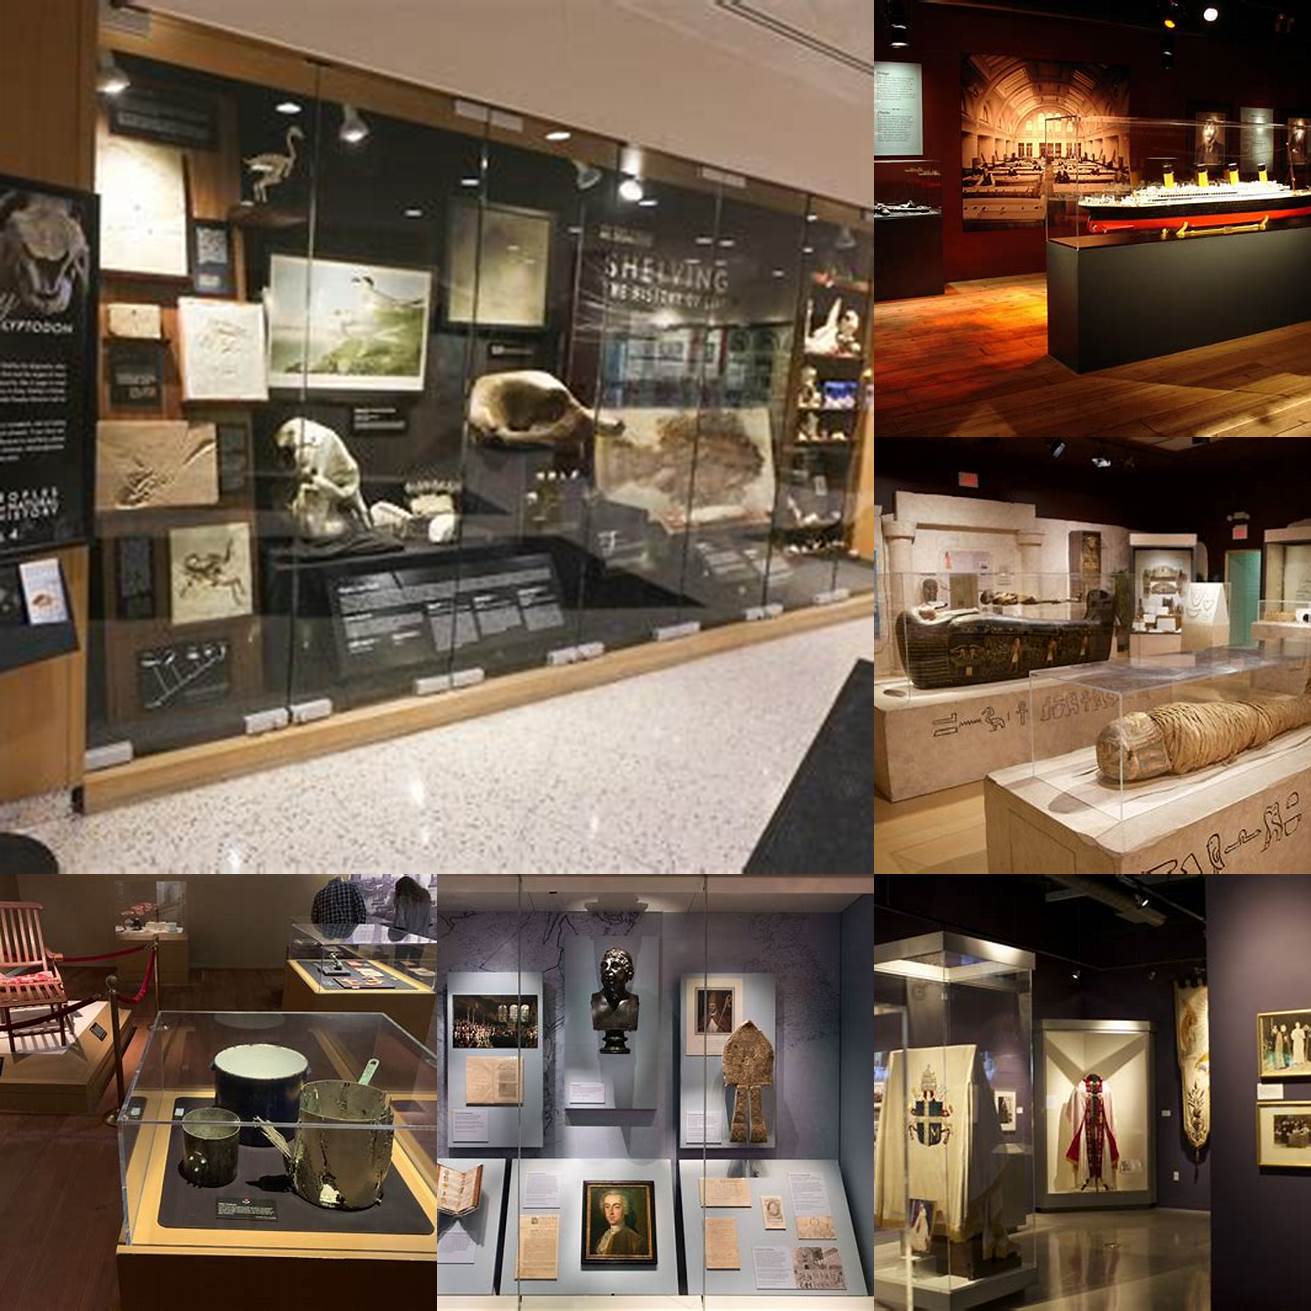 A museum exhibit with various artifacts